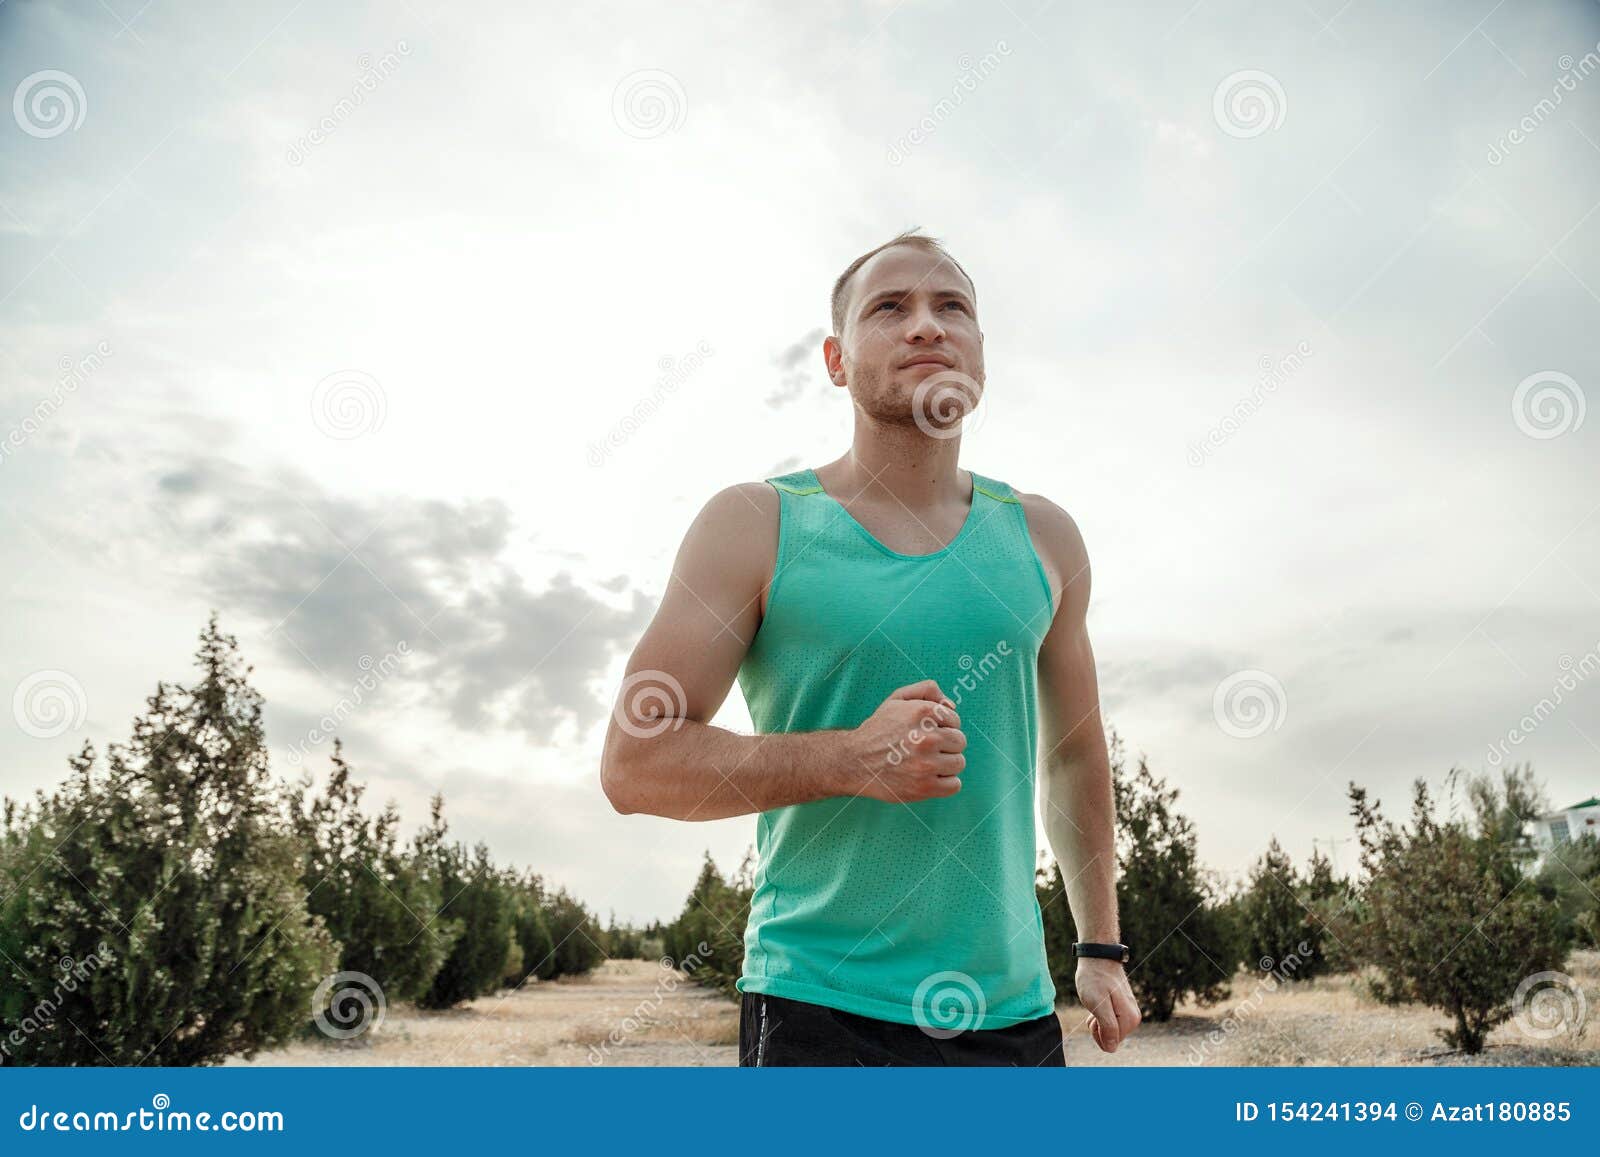 Caucasian Guy in a Blue T-shirt and Black Shorts,running Over Rough ...